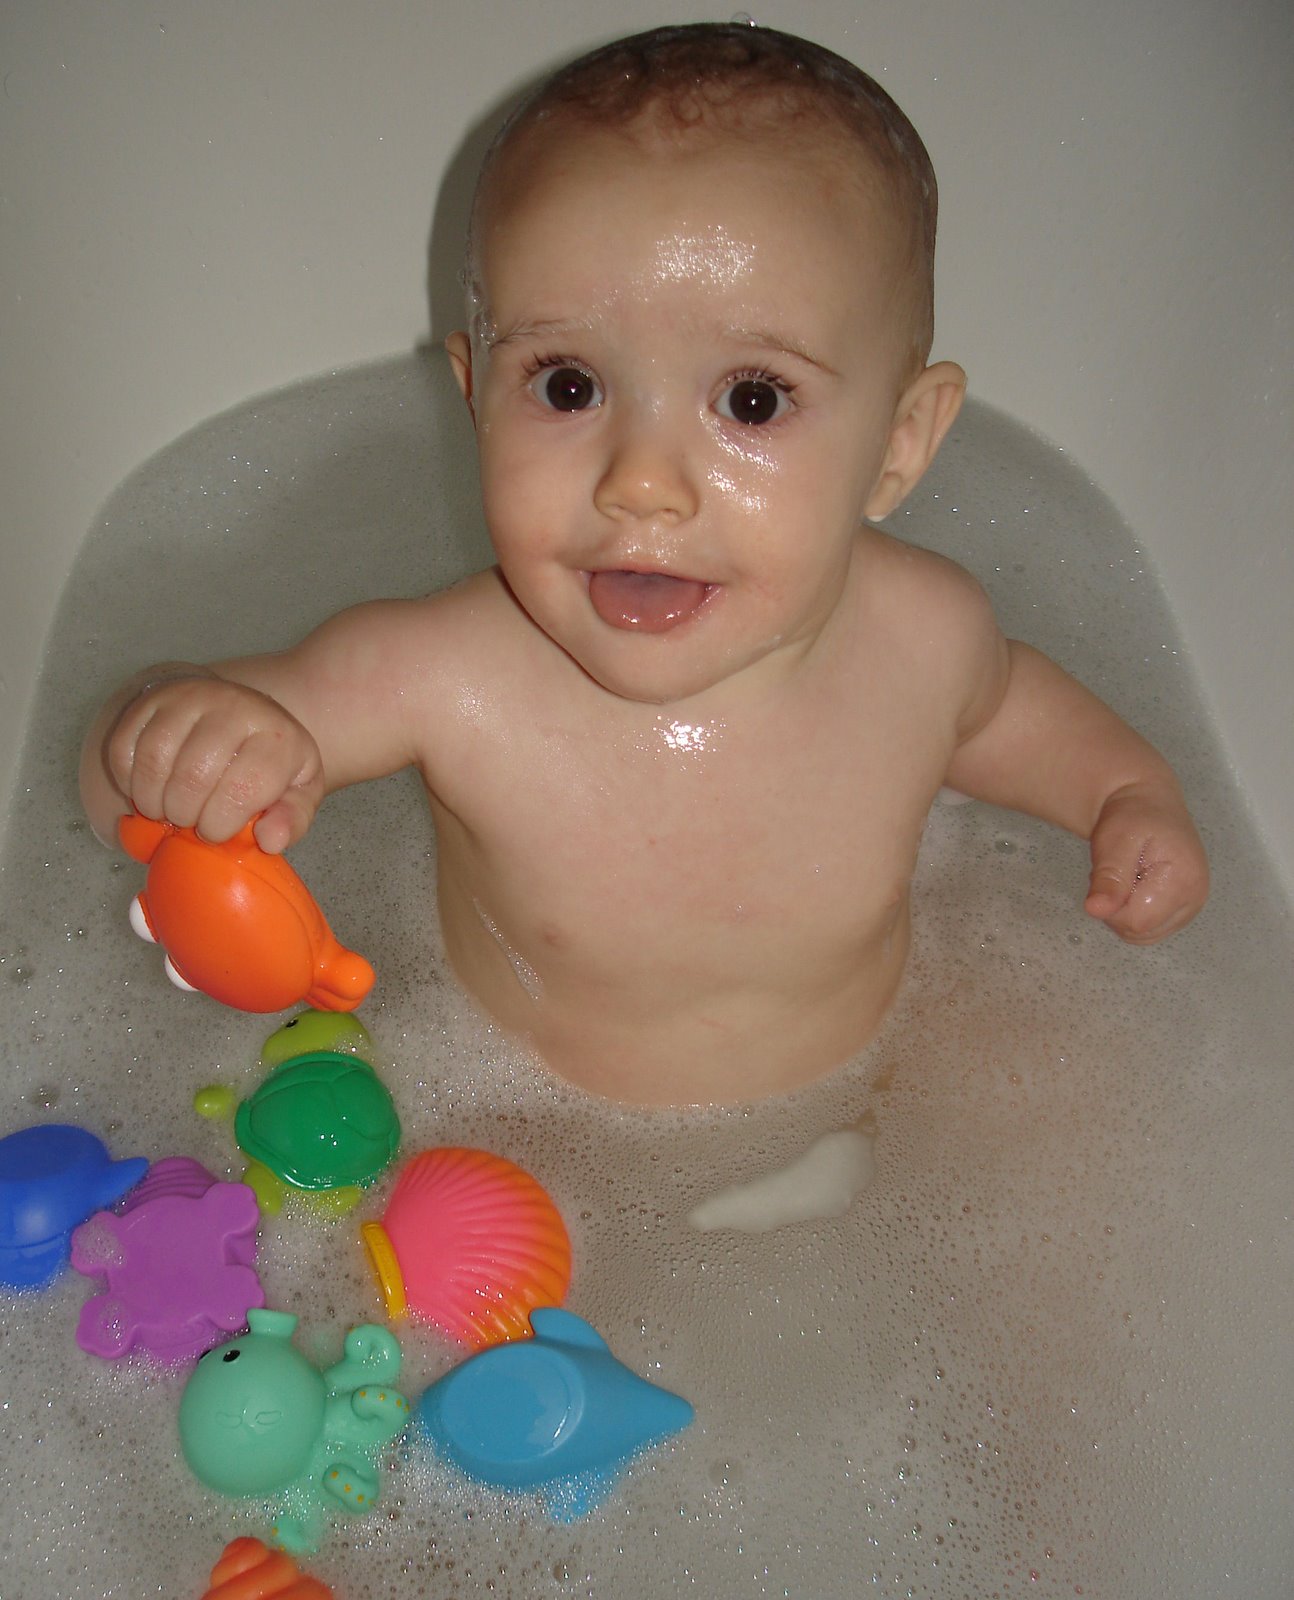 [currier+in+the+tub+with+new+toys2.jpg]